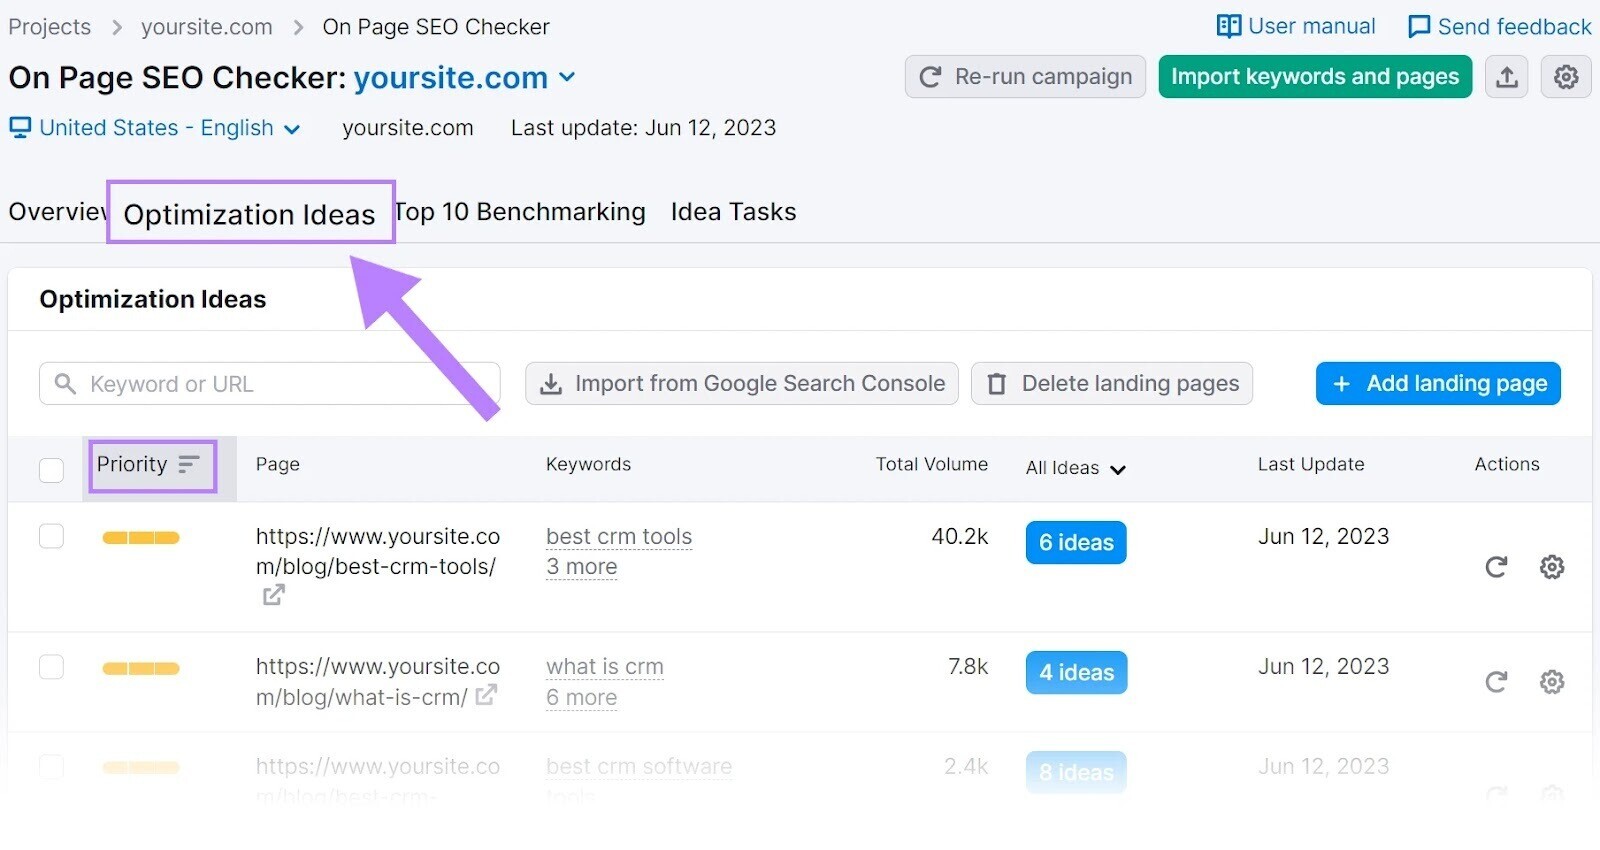 "Optimization ideas" tab in On Page SEO Checker.